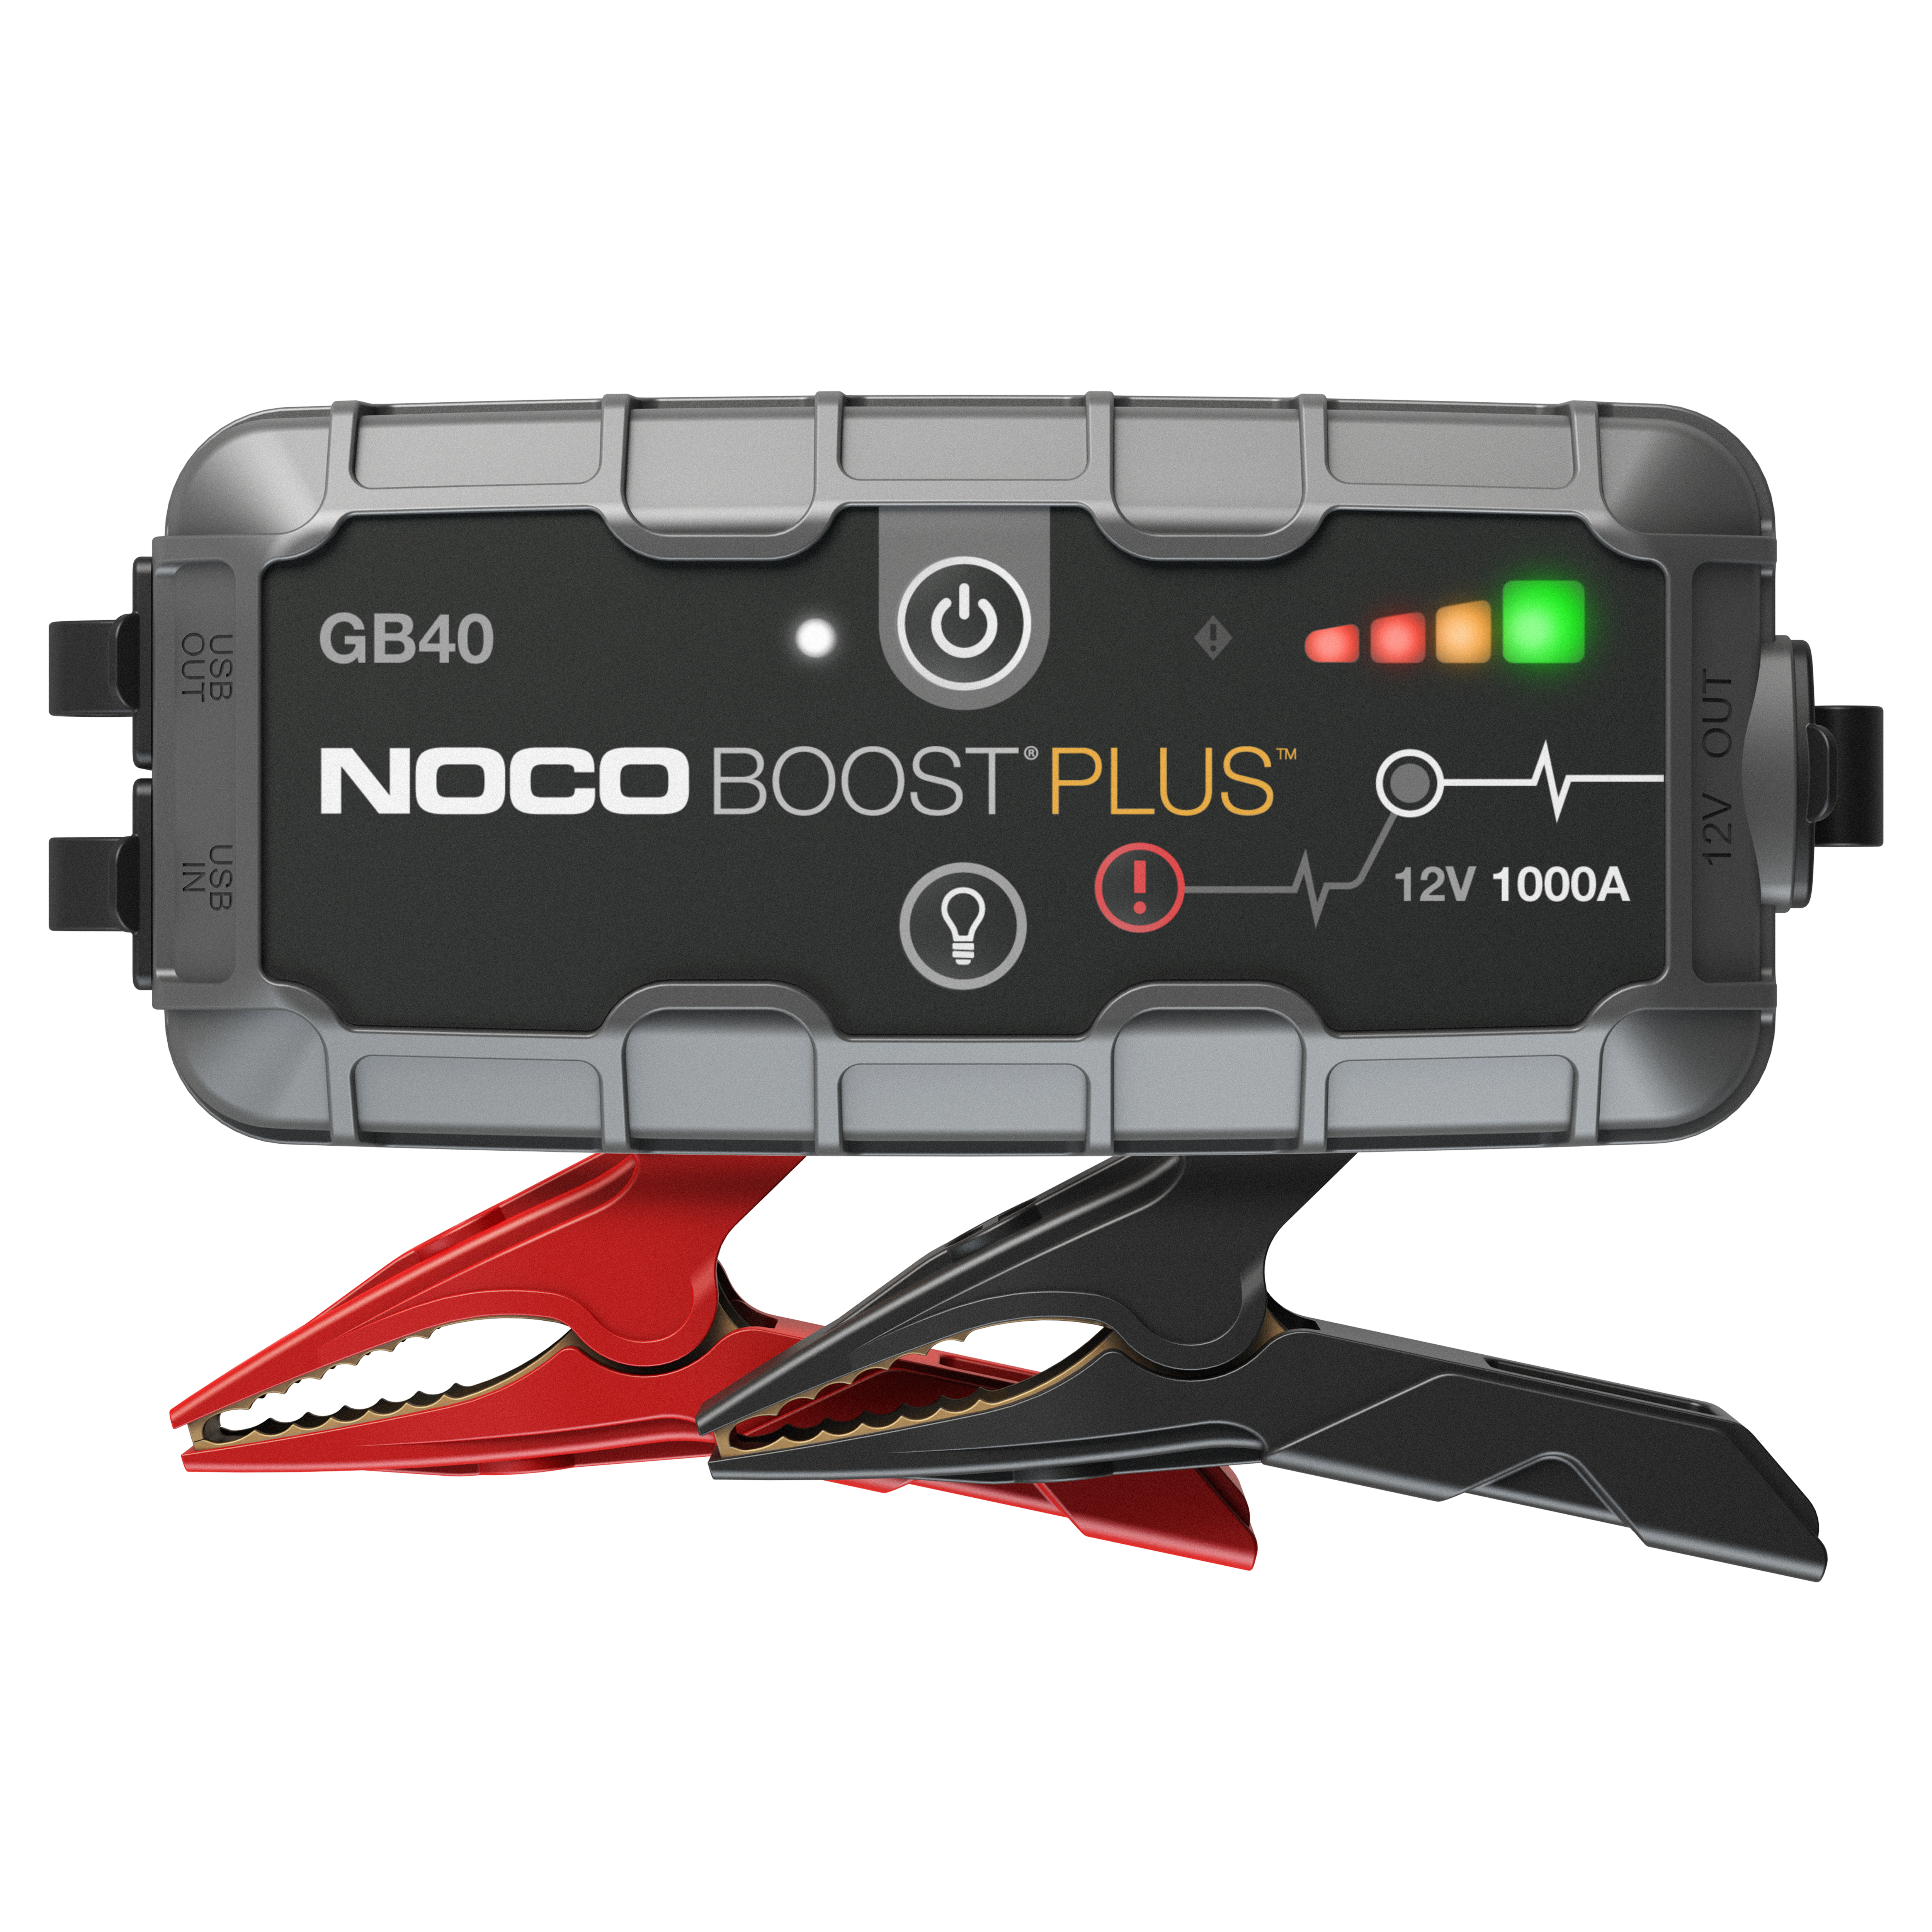 Noco Boost Plus GB40 booster jump starter starting aid power bank